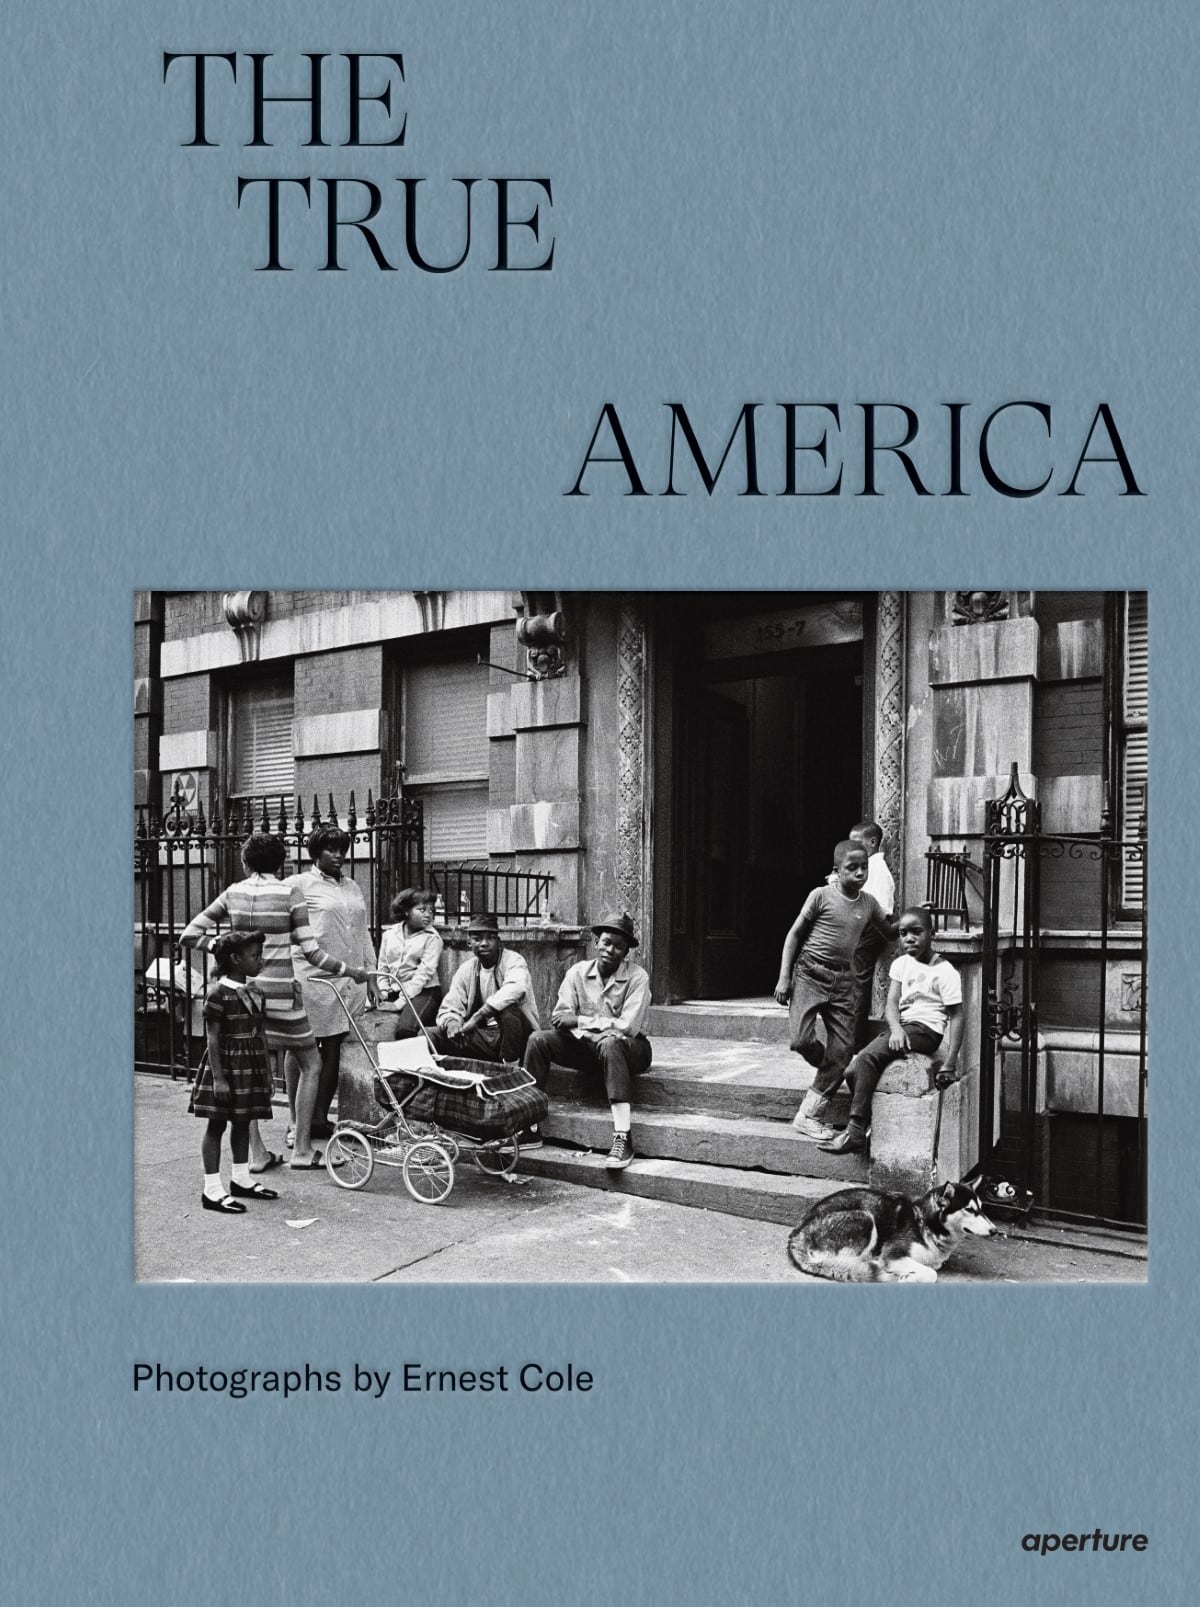 The True America by Ernest Cole